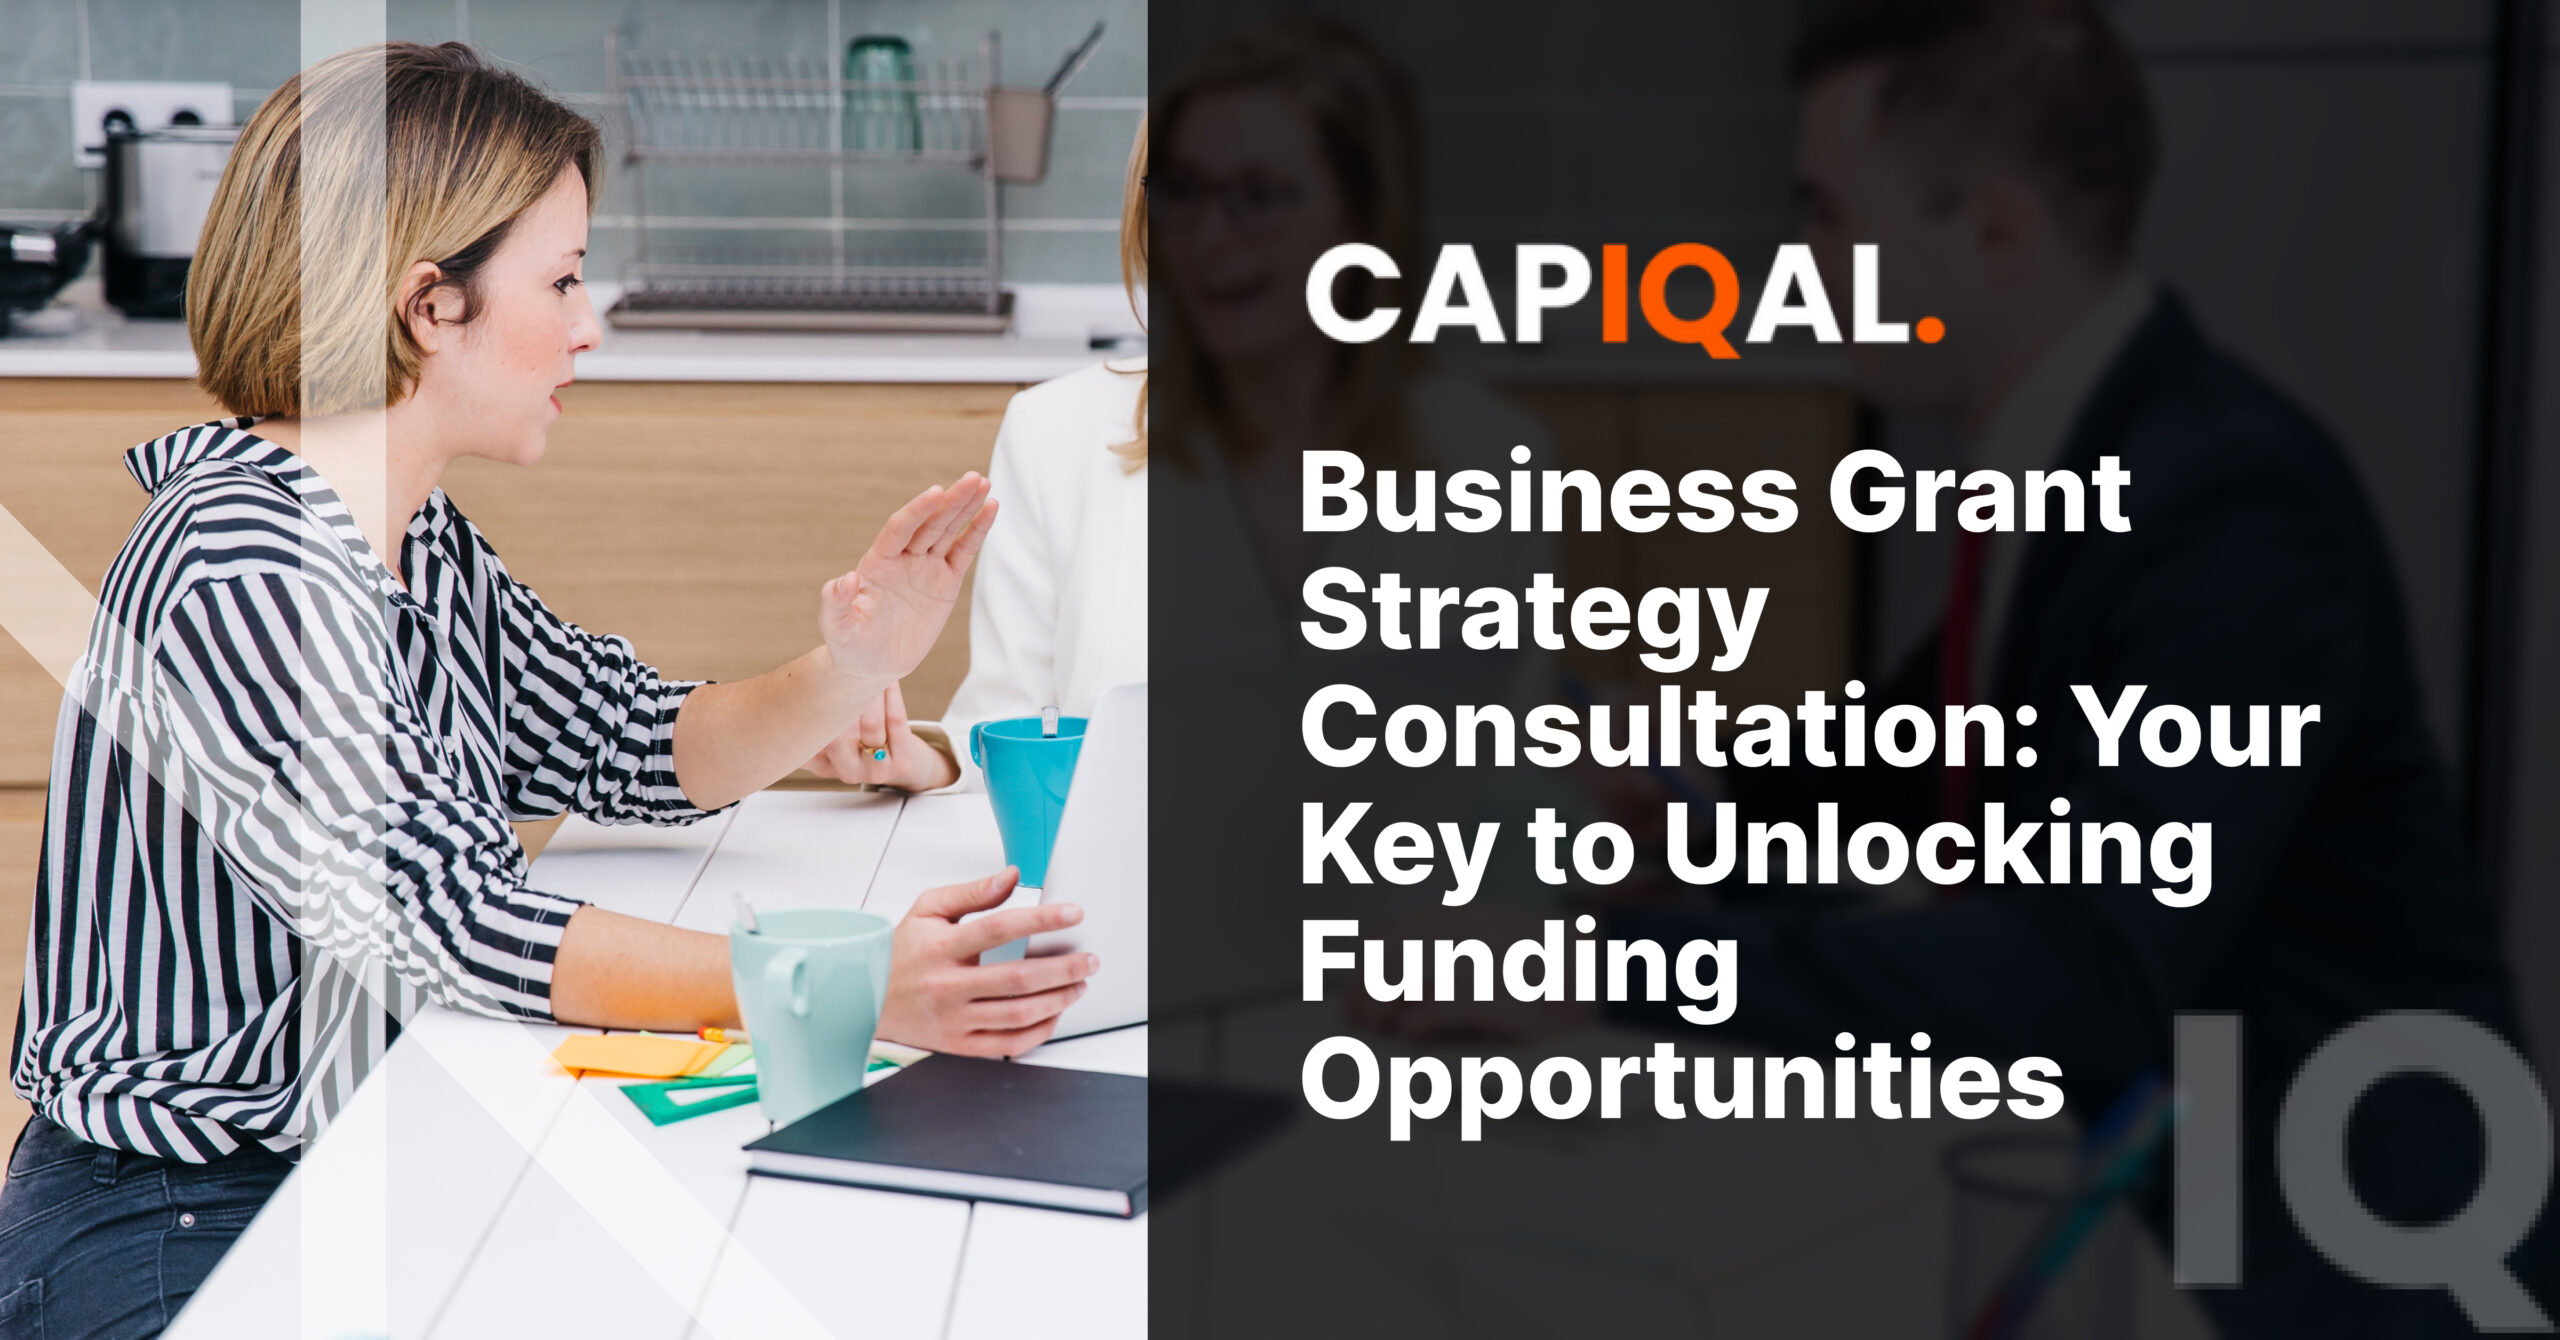 Business Grant Strategy Consultation: Your Key to Unlocking Funding Opportunities